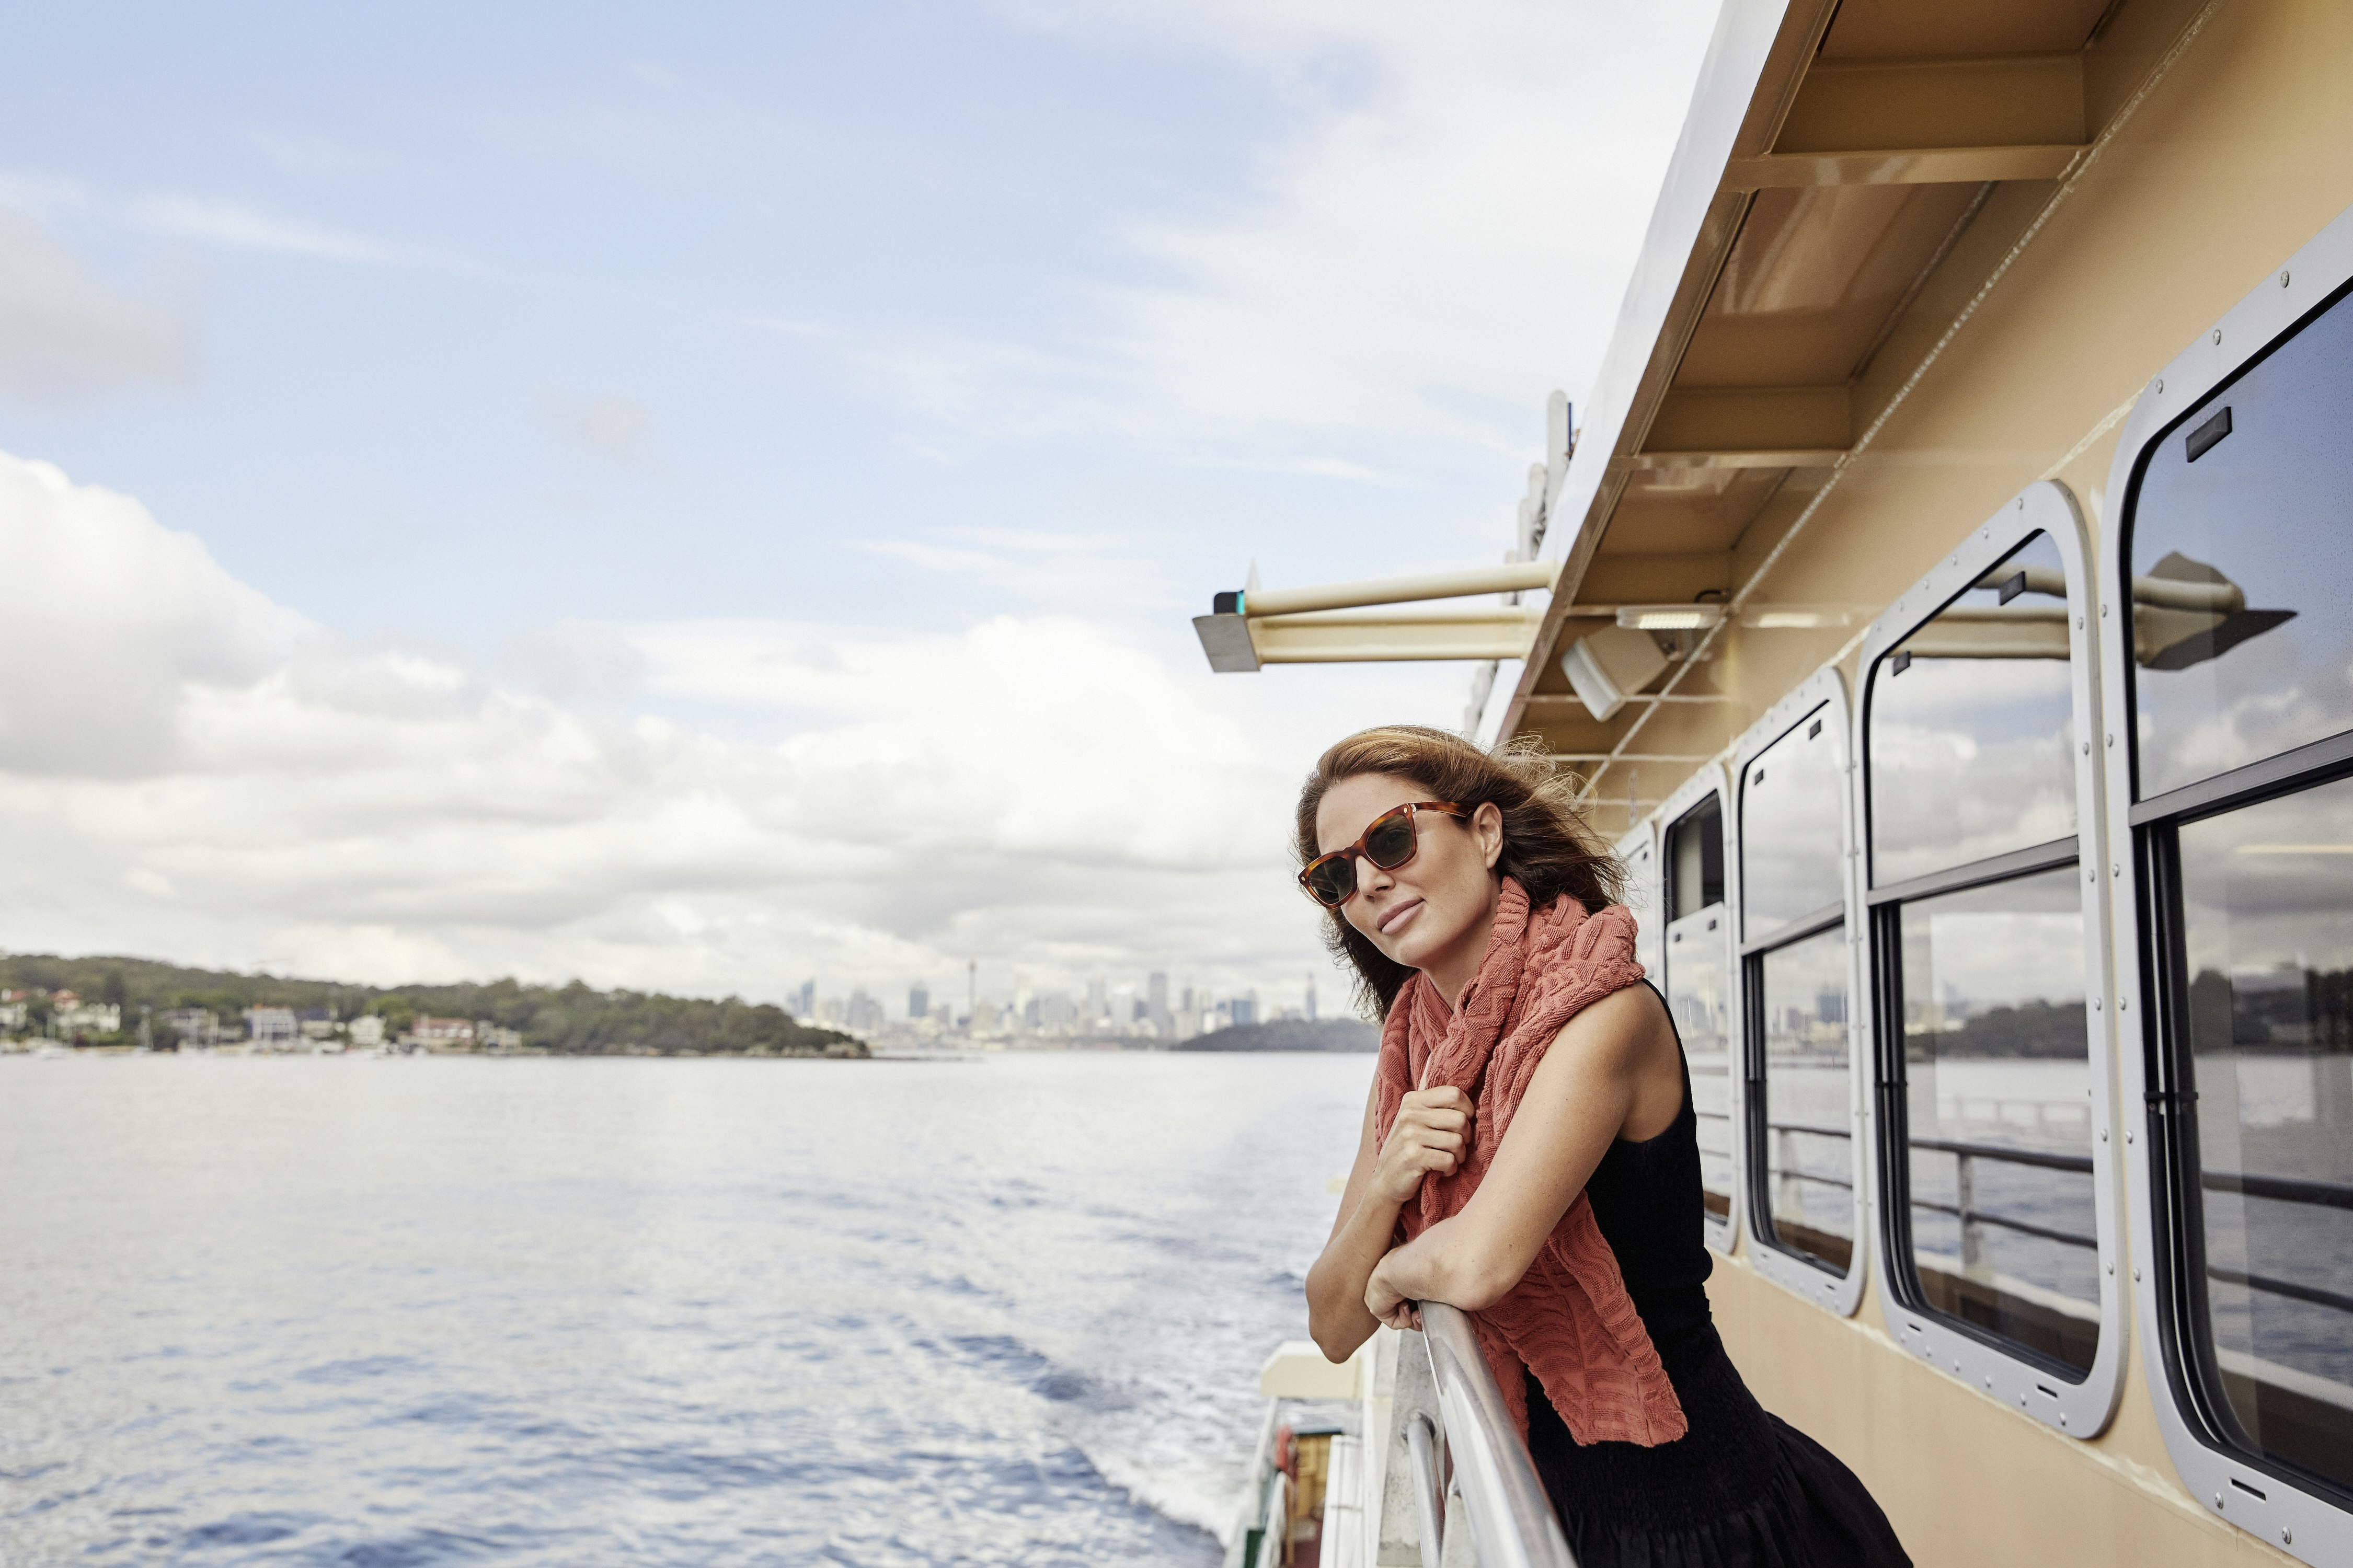 The cool breeze on your face as you ride the Manly to Circular Quay ferry